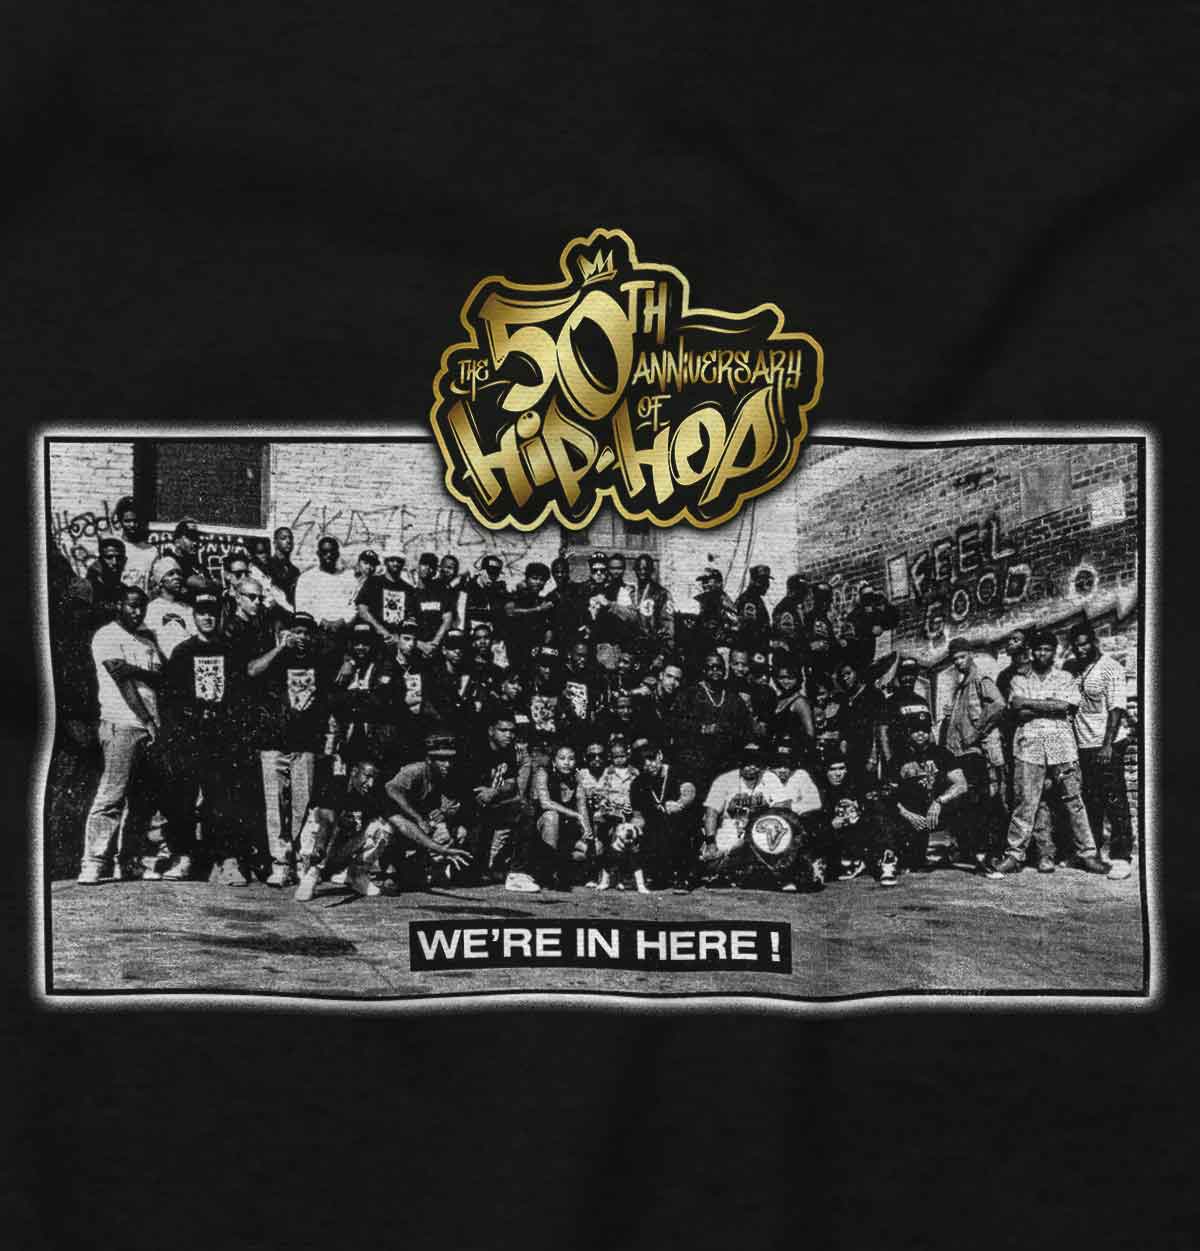 This image showcases the heartwarming bond within the hip-hop community on the streets. It celebrates the unity and positivity that hip-hop has brought to the world for 50 years. Feel inspired and share the love!